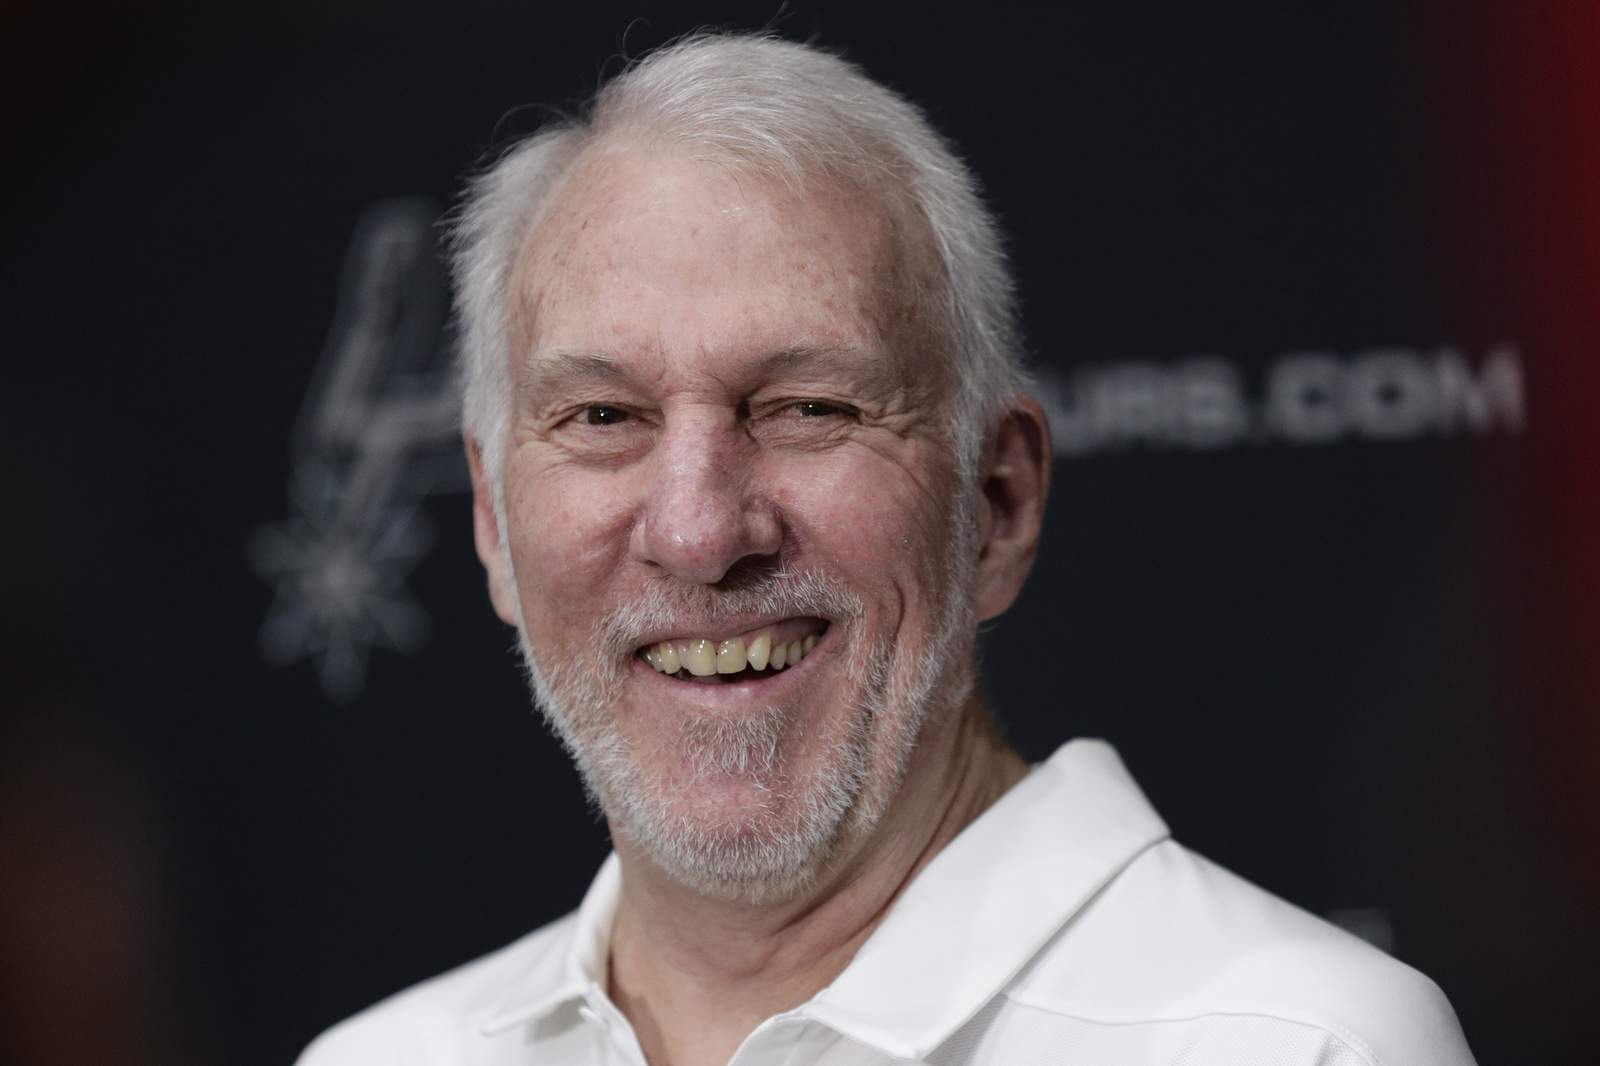 Masked man: Spurs' Popovich wears face covering for game